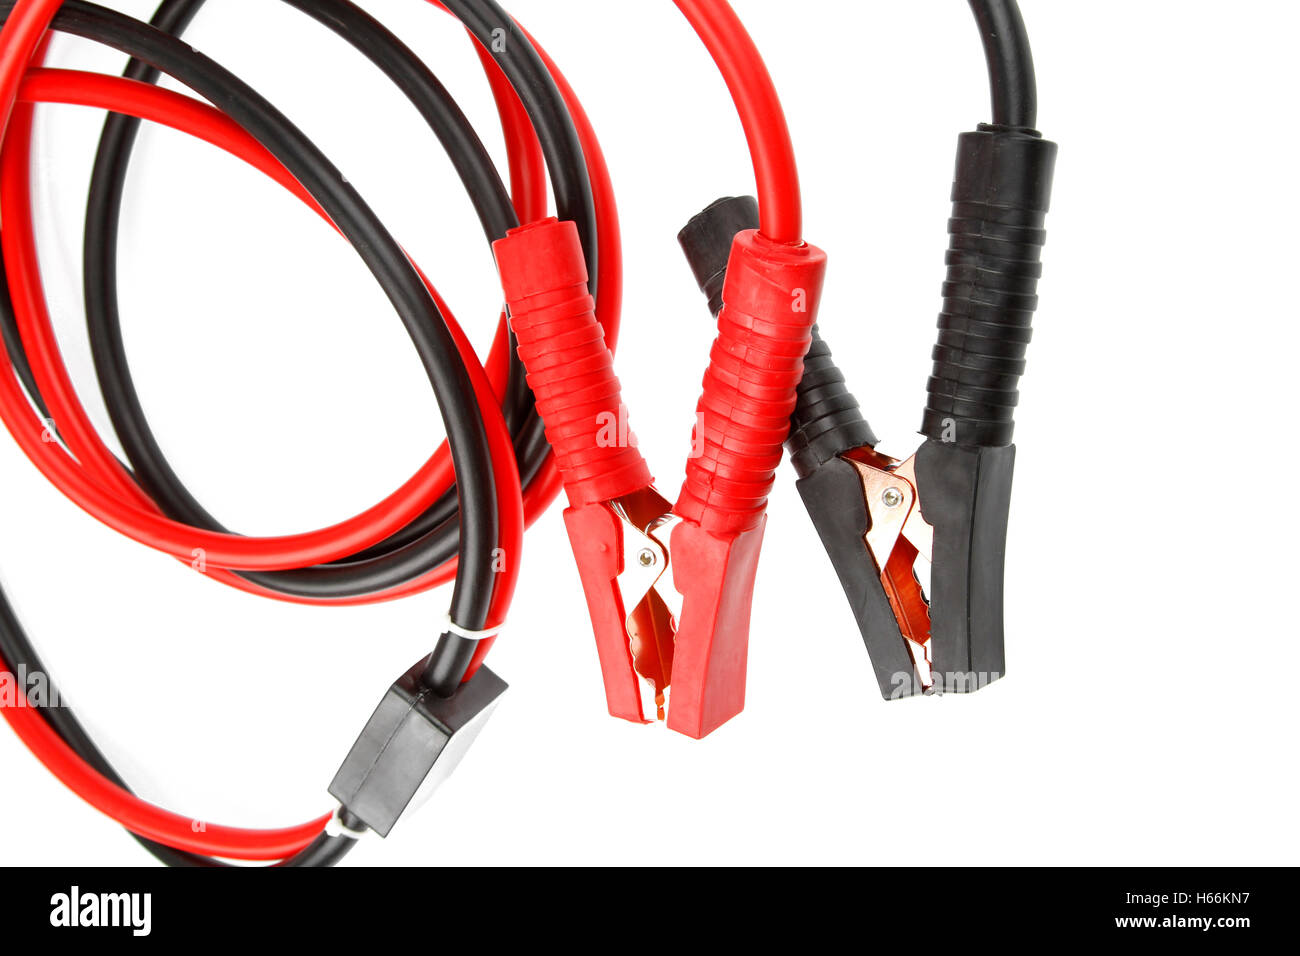 Jumper cables on plain background Stock Photo